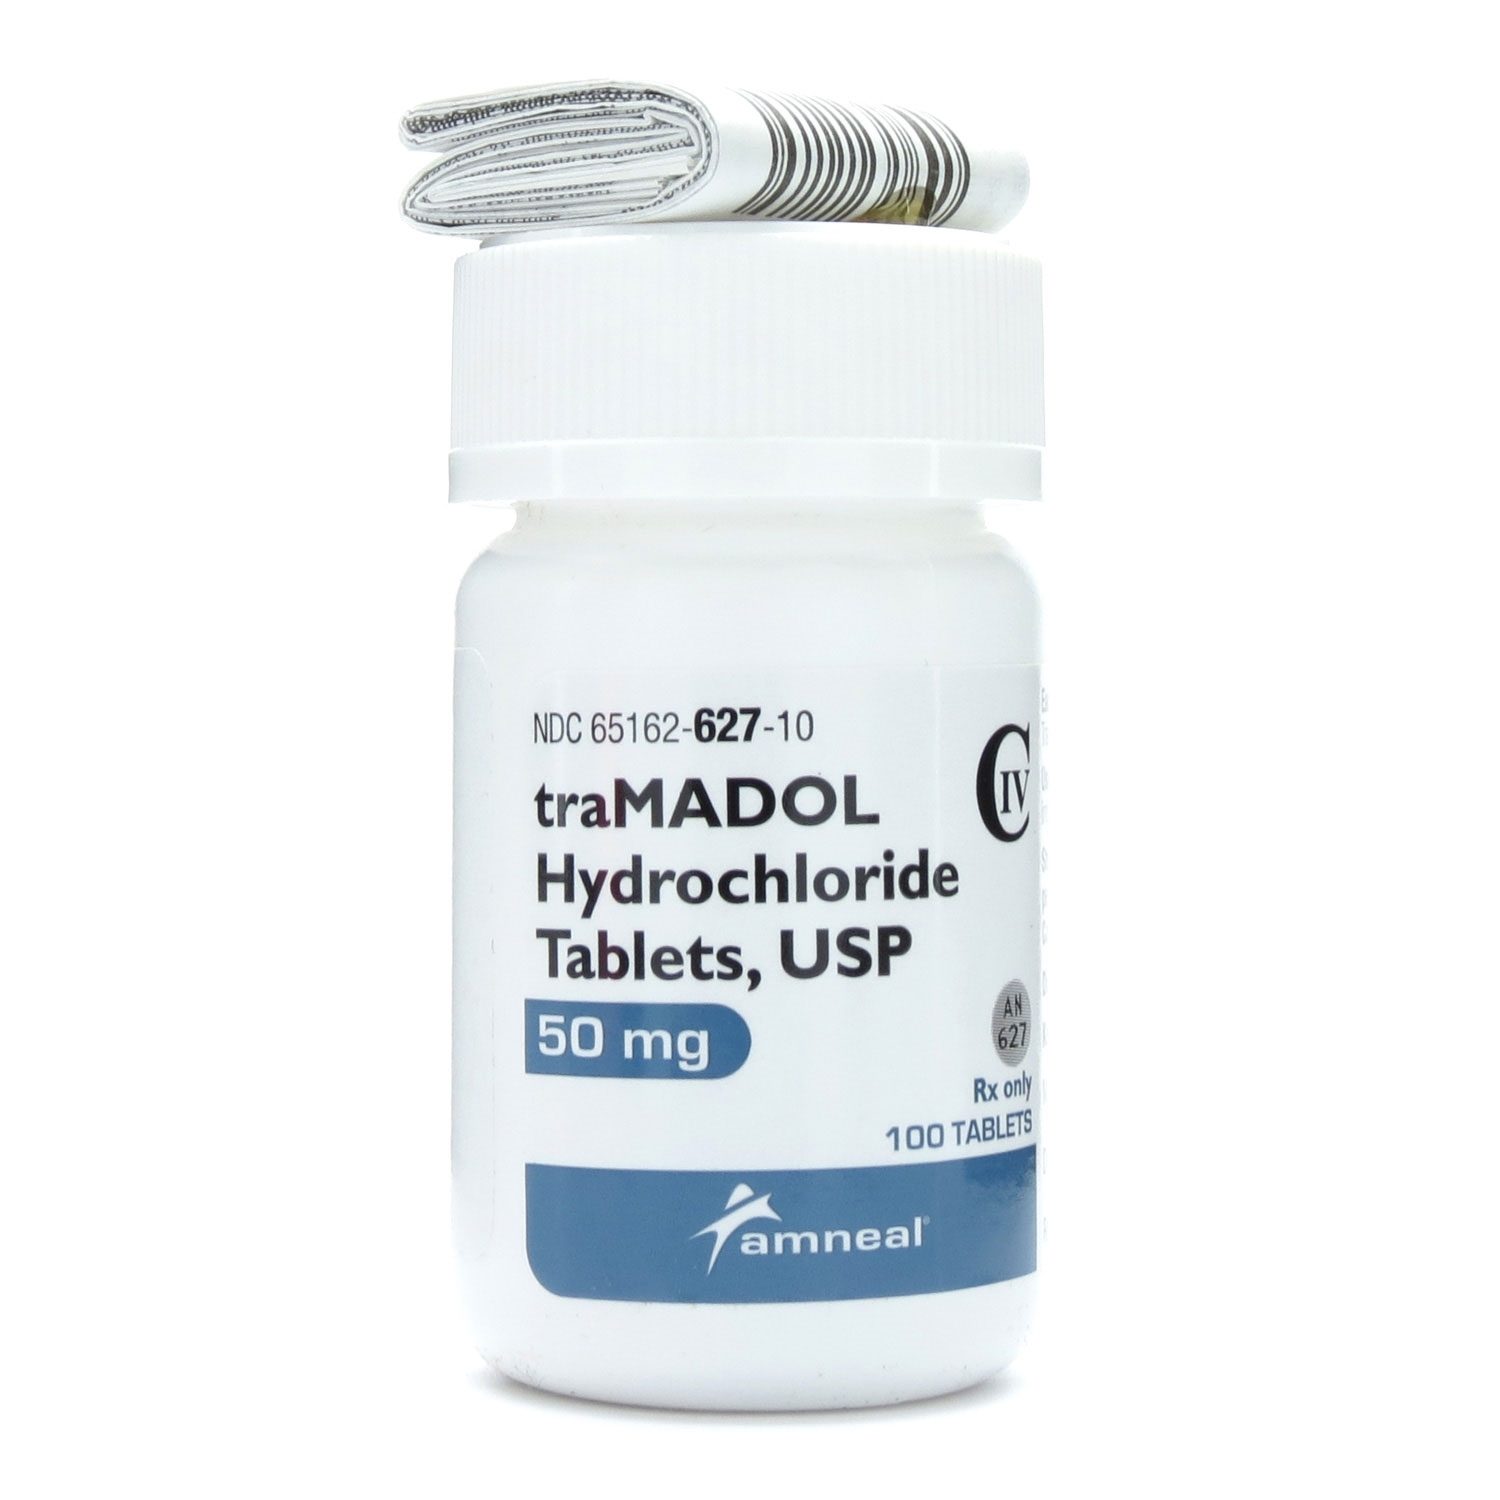 tramadol 50 mg dosages